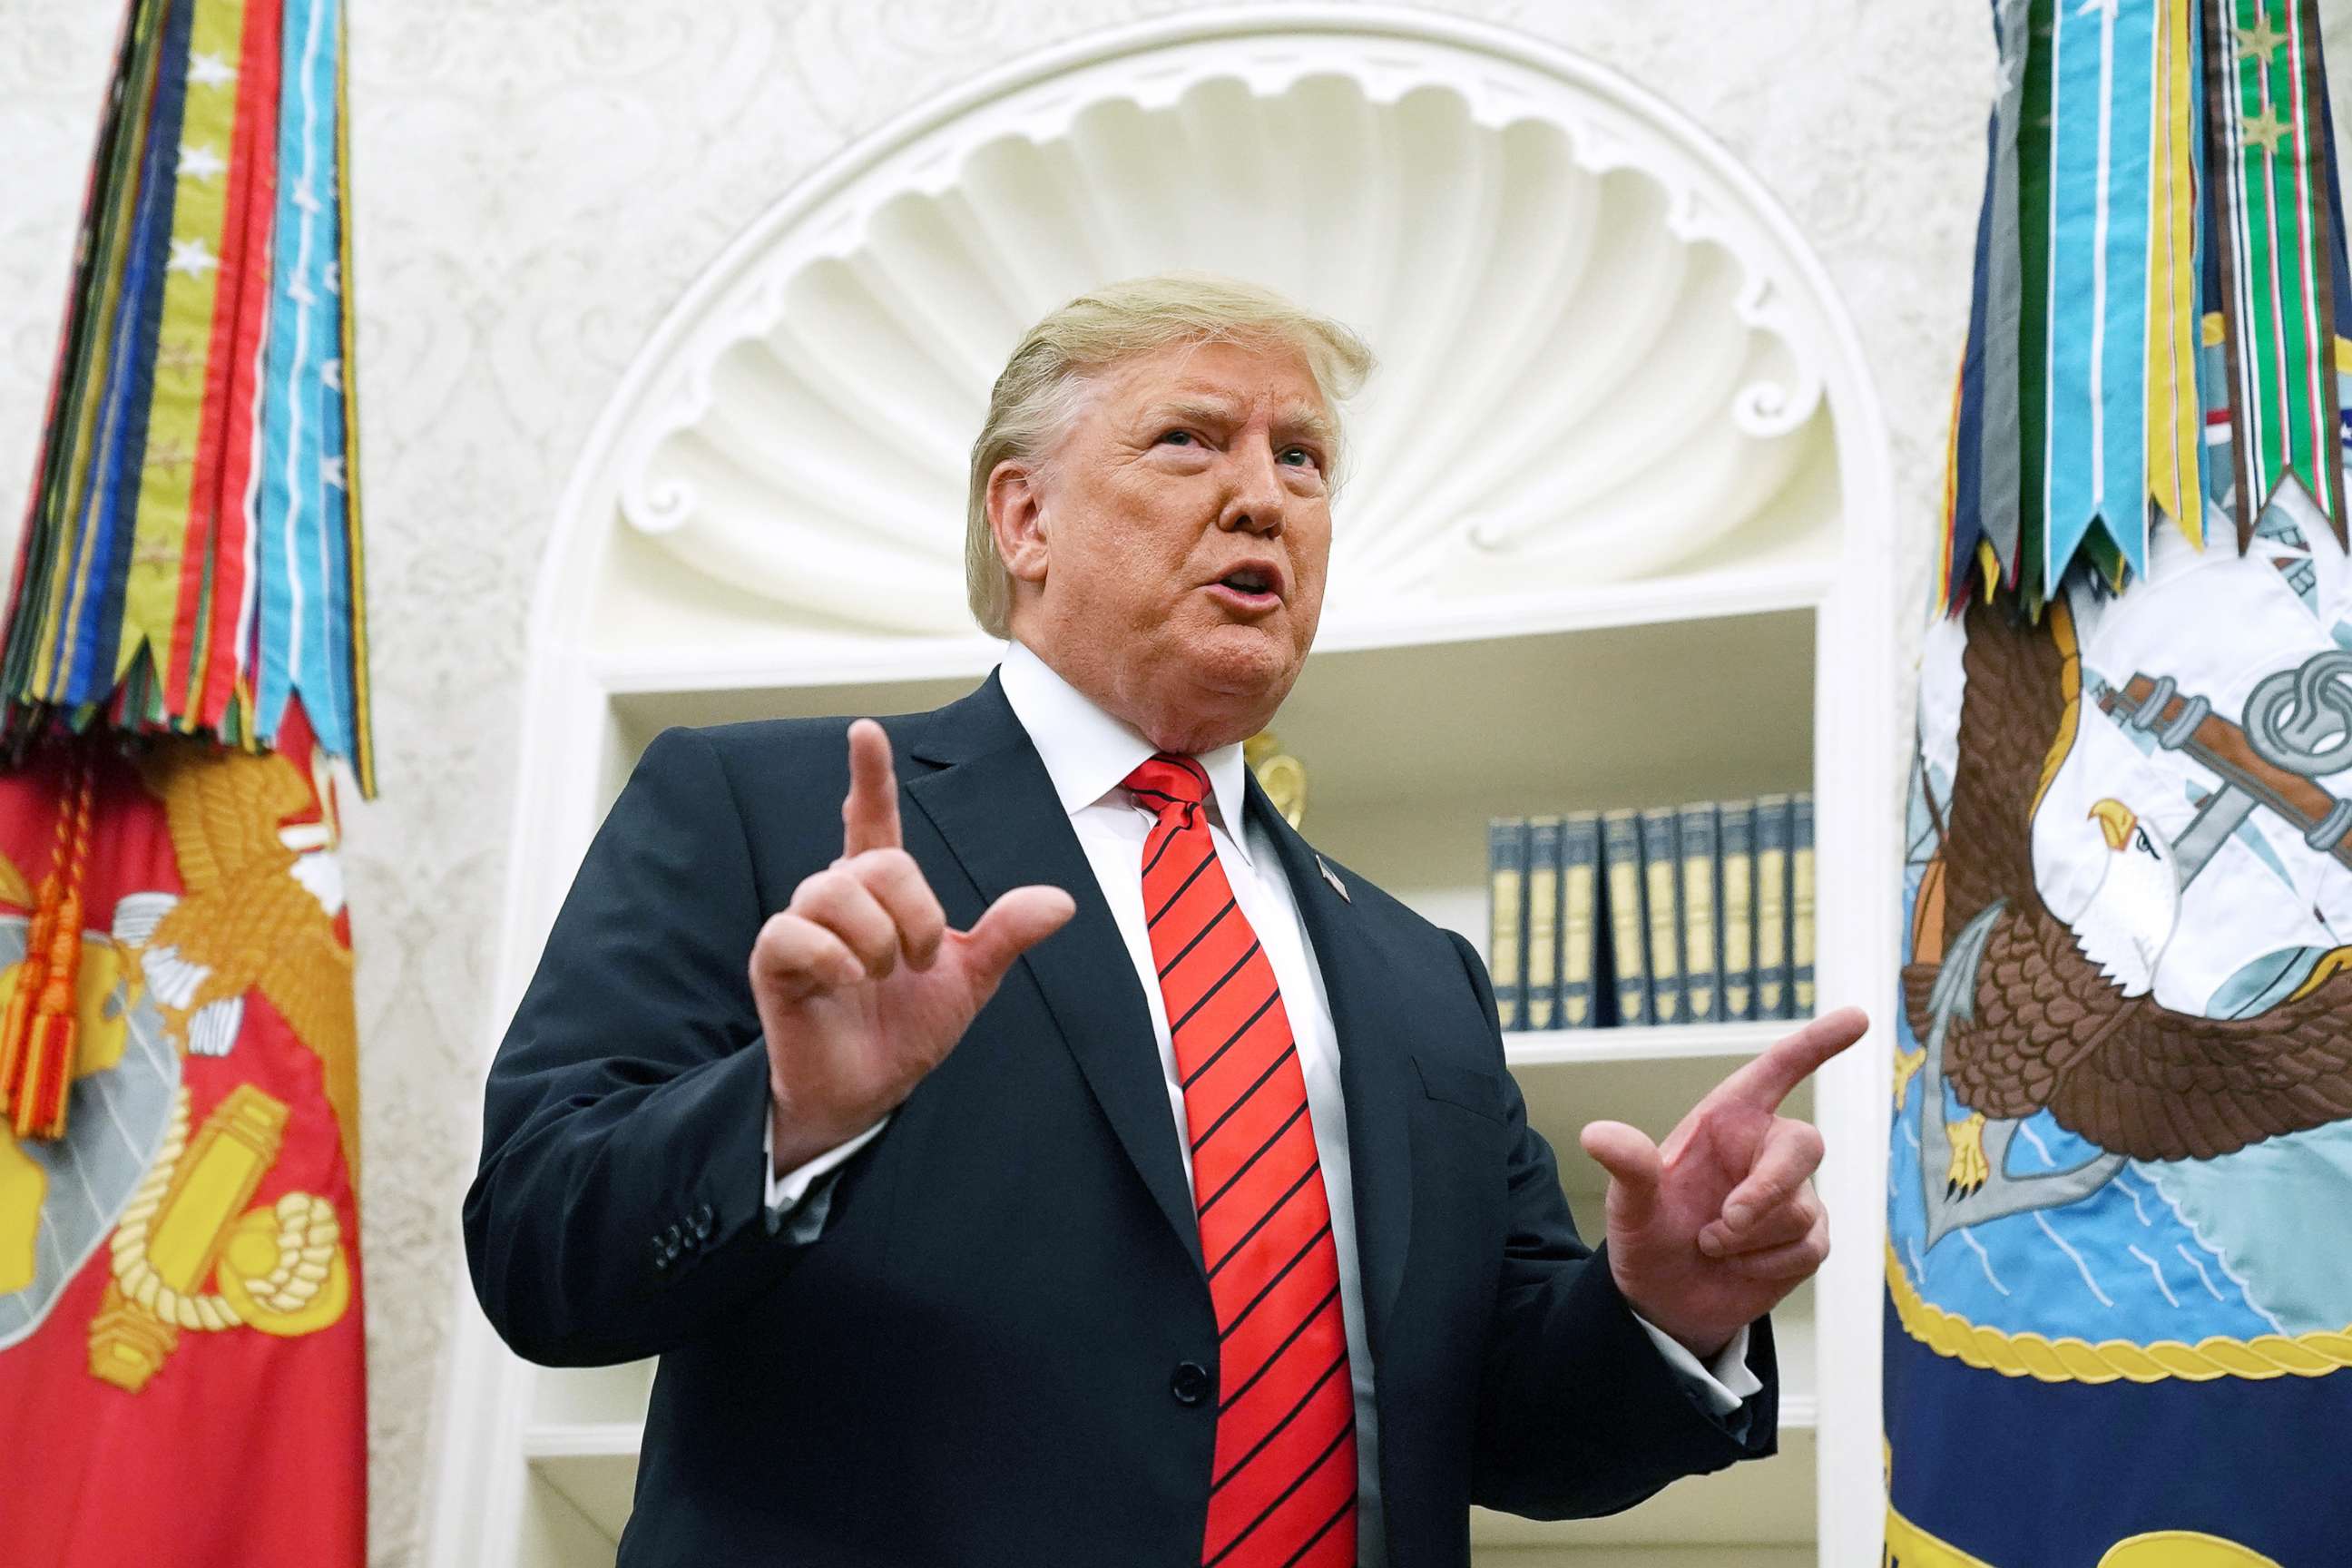 PHOTO: President Donald Trump gives pauses to answer a reporters' question about a whistleblower as he leaves the Oval Office after hosting the ceremonial swearing in of Labor Secretary Eugene Scalia at the White House, Sept. 30, 2019.